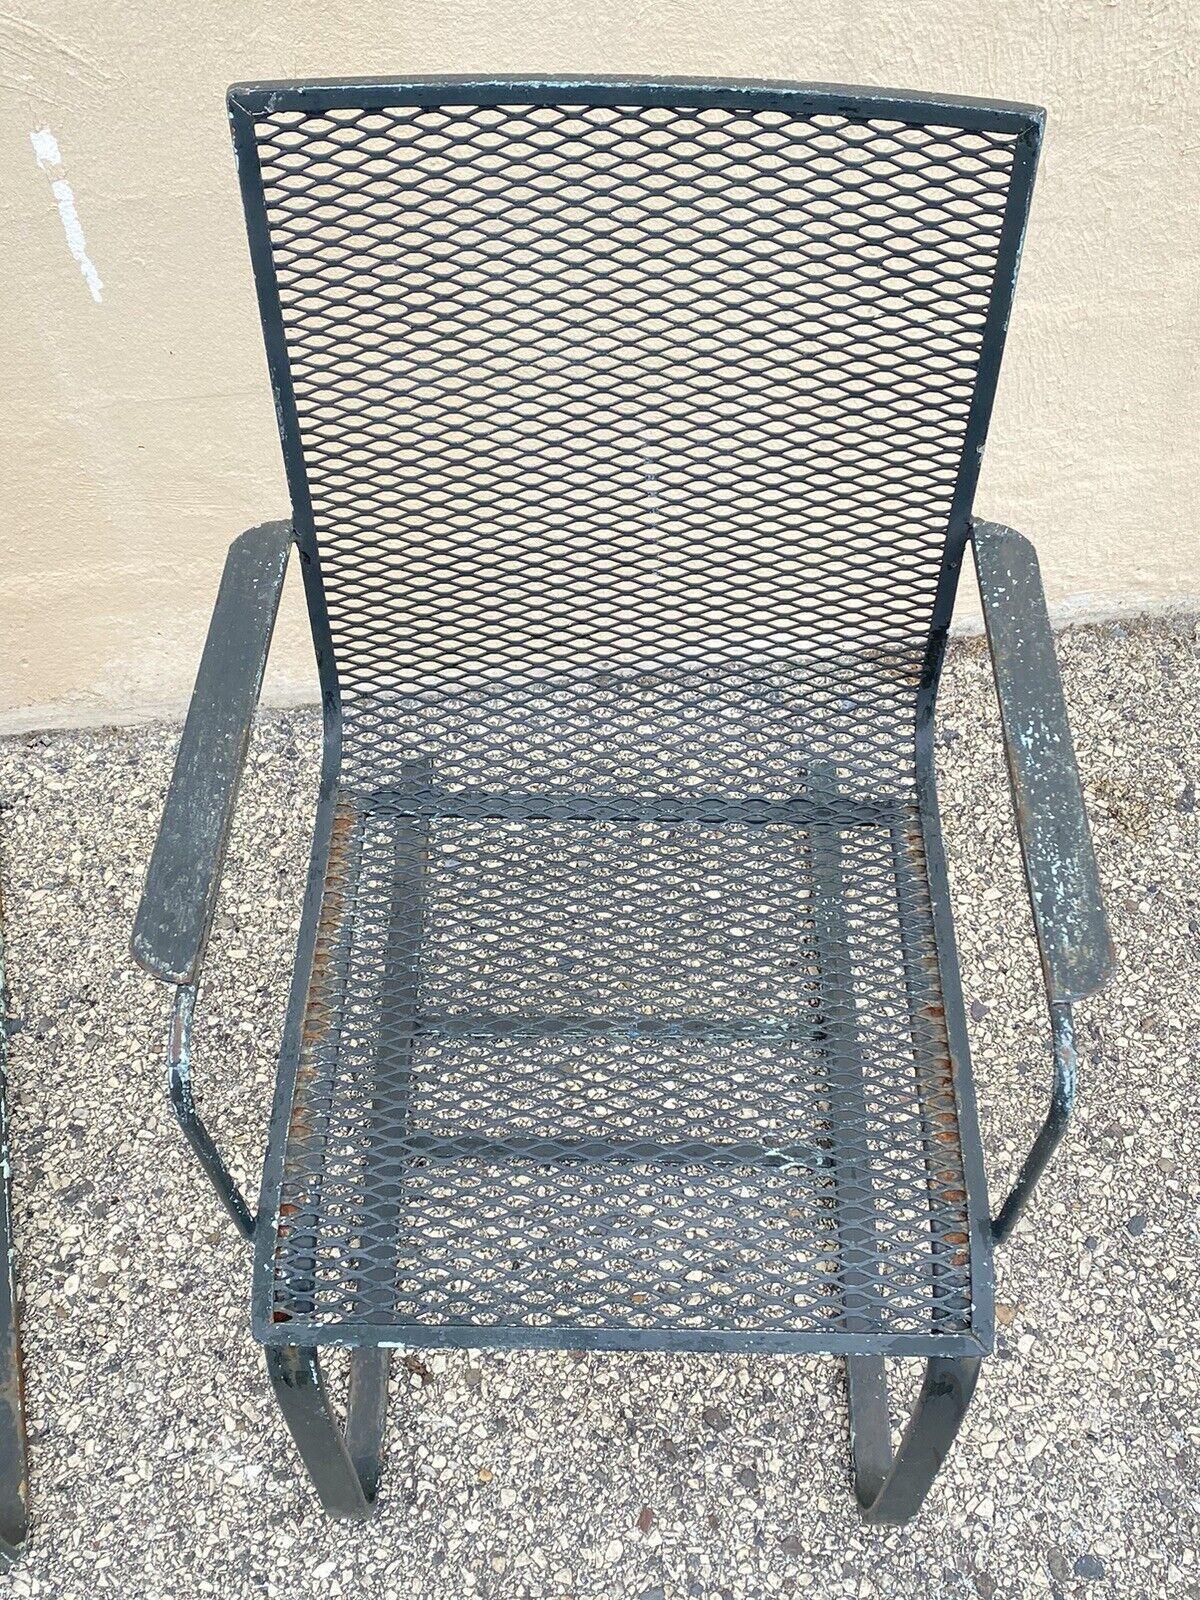 20th Century Industrial Modern Wrought Iron Metal Mesh Cantilever Garden Patio Chair - a Pair For Sale